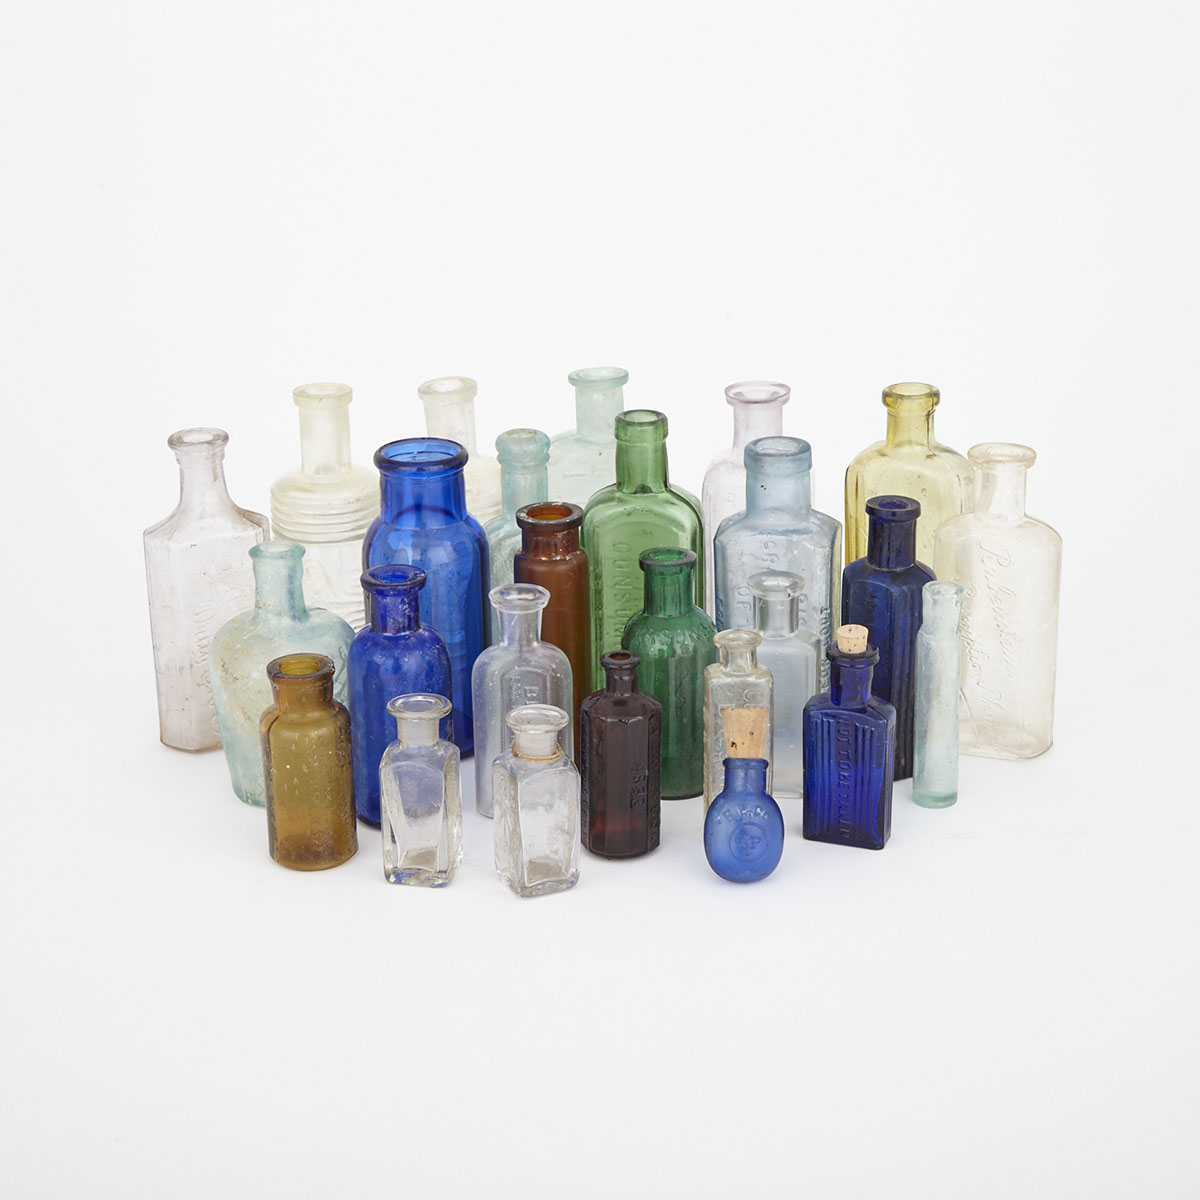 Miscellaneous Group of 26 Glass Medicine Bottles, 19th/early 20th century